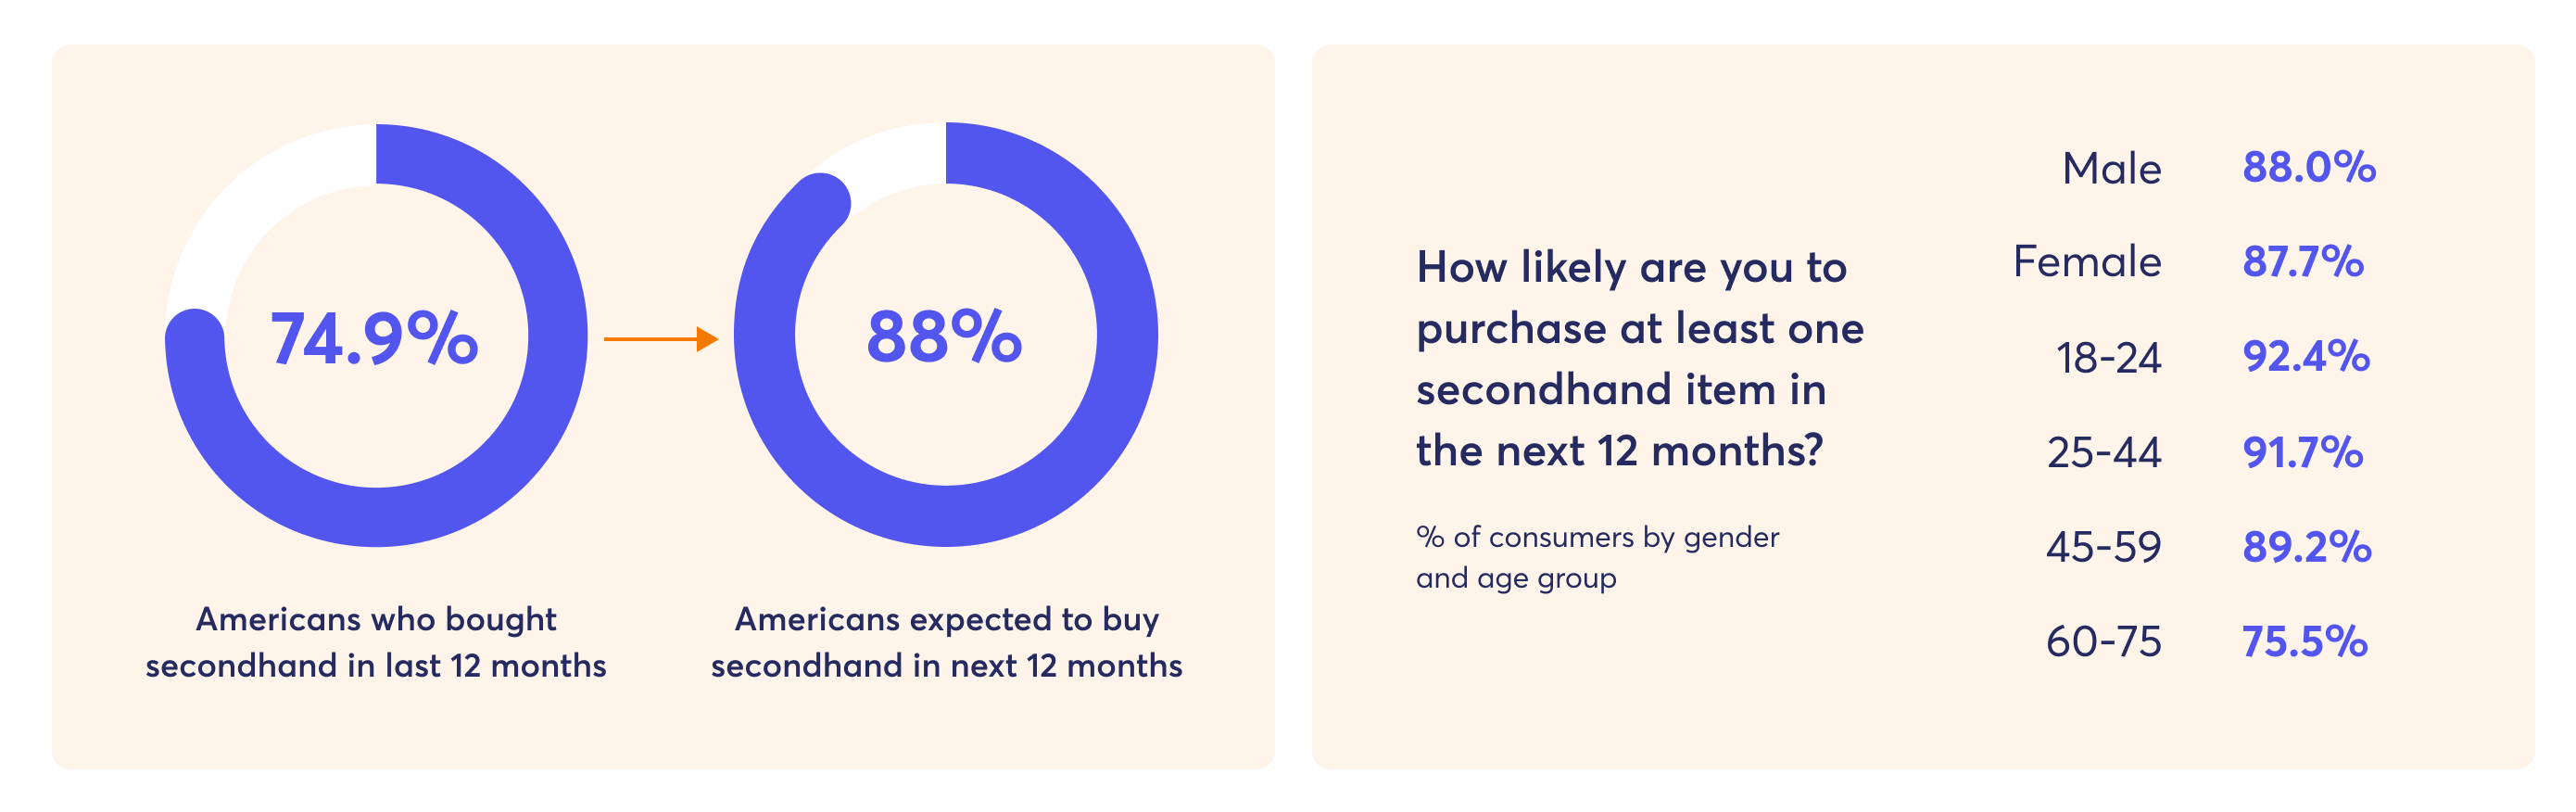 Americans likely to purchase secondhand